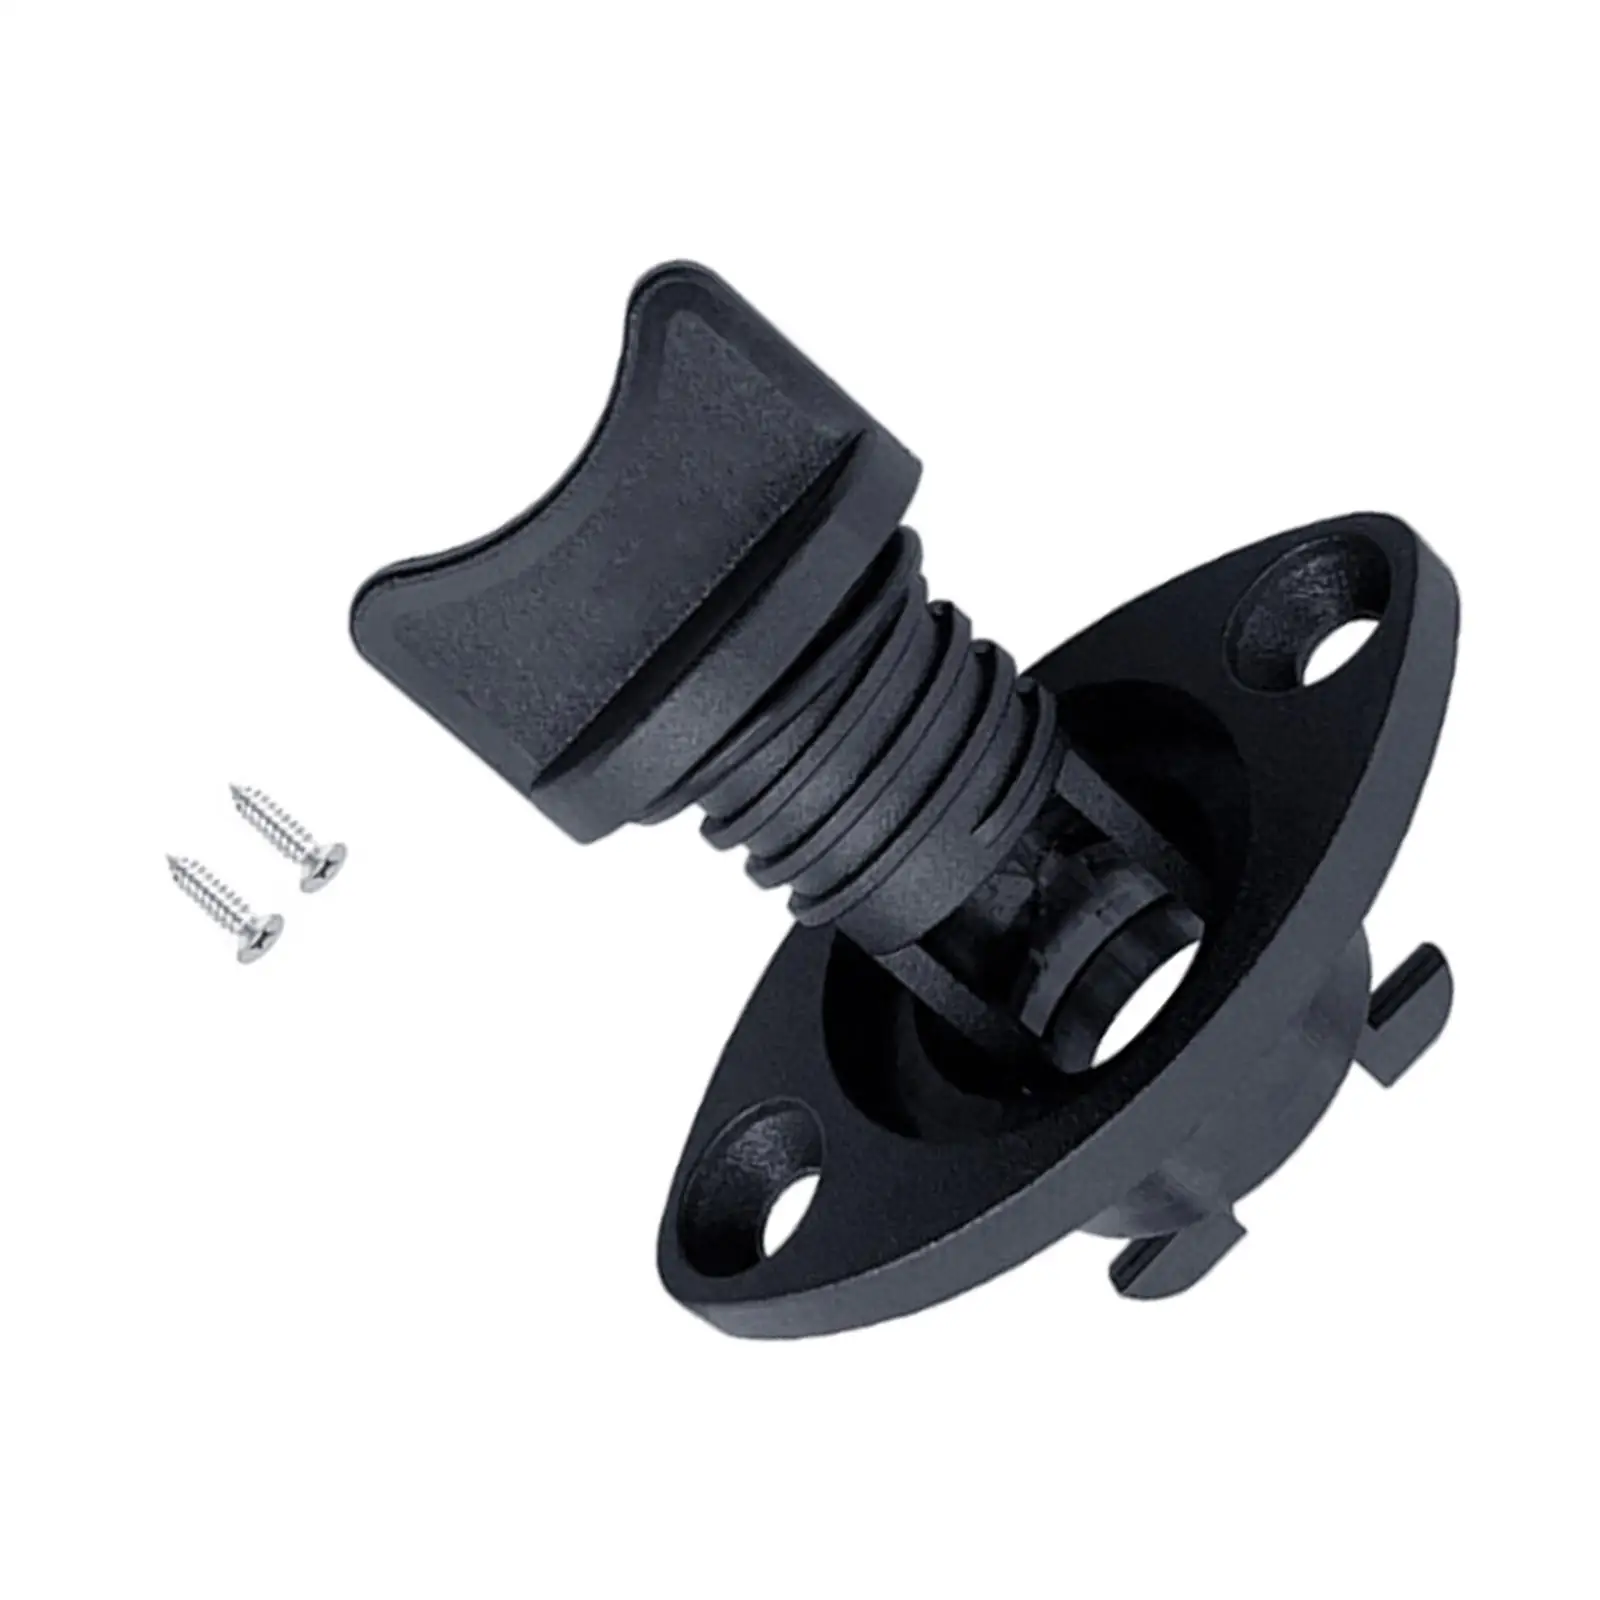 

1'' 25mm Boat Drain Plug Screw Type Accessories Supplies Moulding Hardware Black Hull Thread Plugs for Yacht Canoe Plumbing